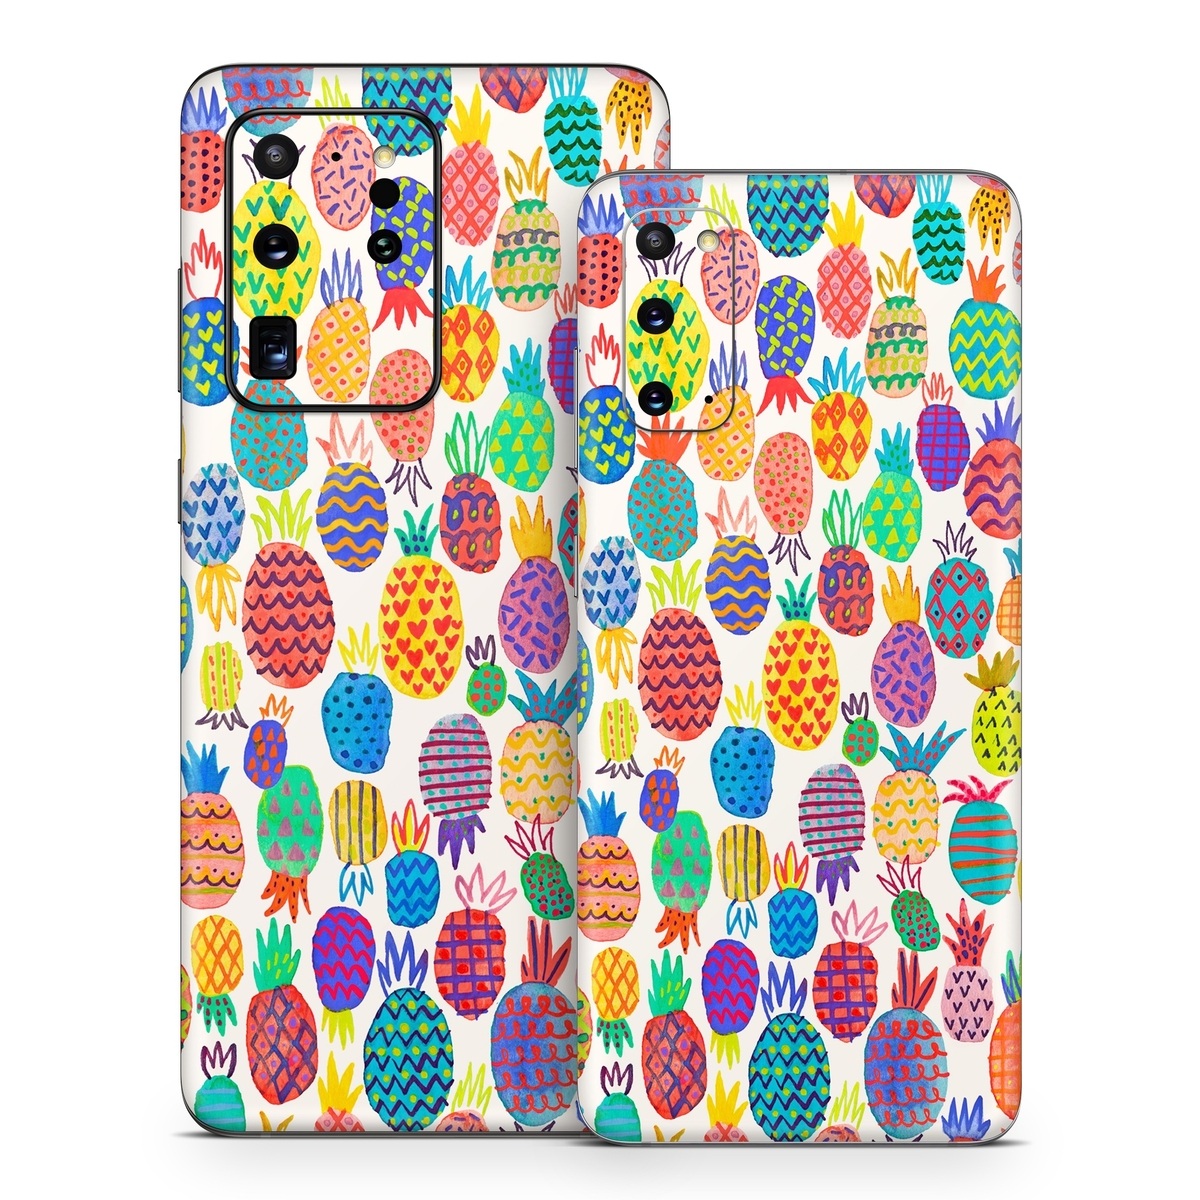 Samsung Galaxy S20 Series Skin design of Colorfulness, Textile, Art, Line, Circle, Symmetry, Pattern, Electric blue, Visual arts, Design, with white, red, blue, green, yellow, purple, pink colors